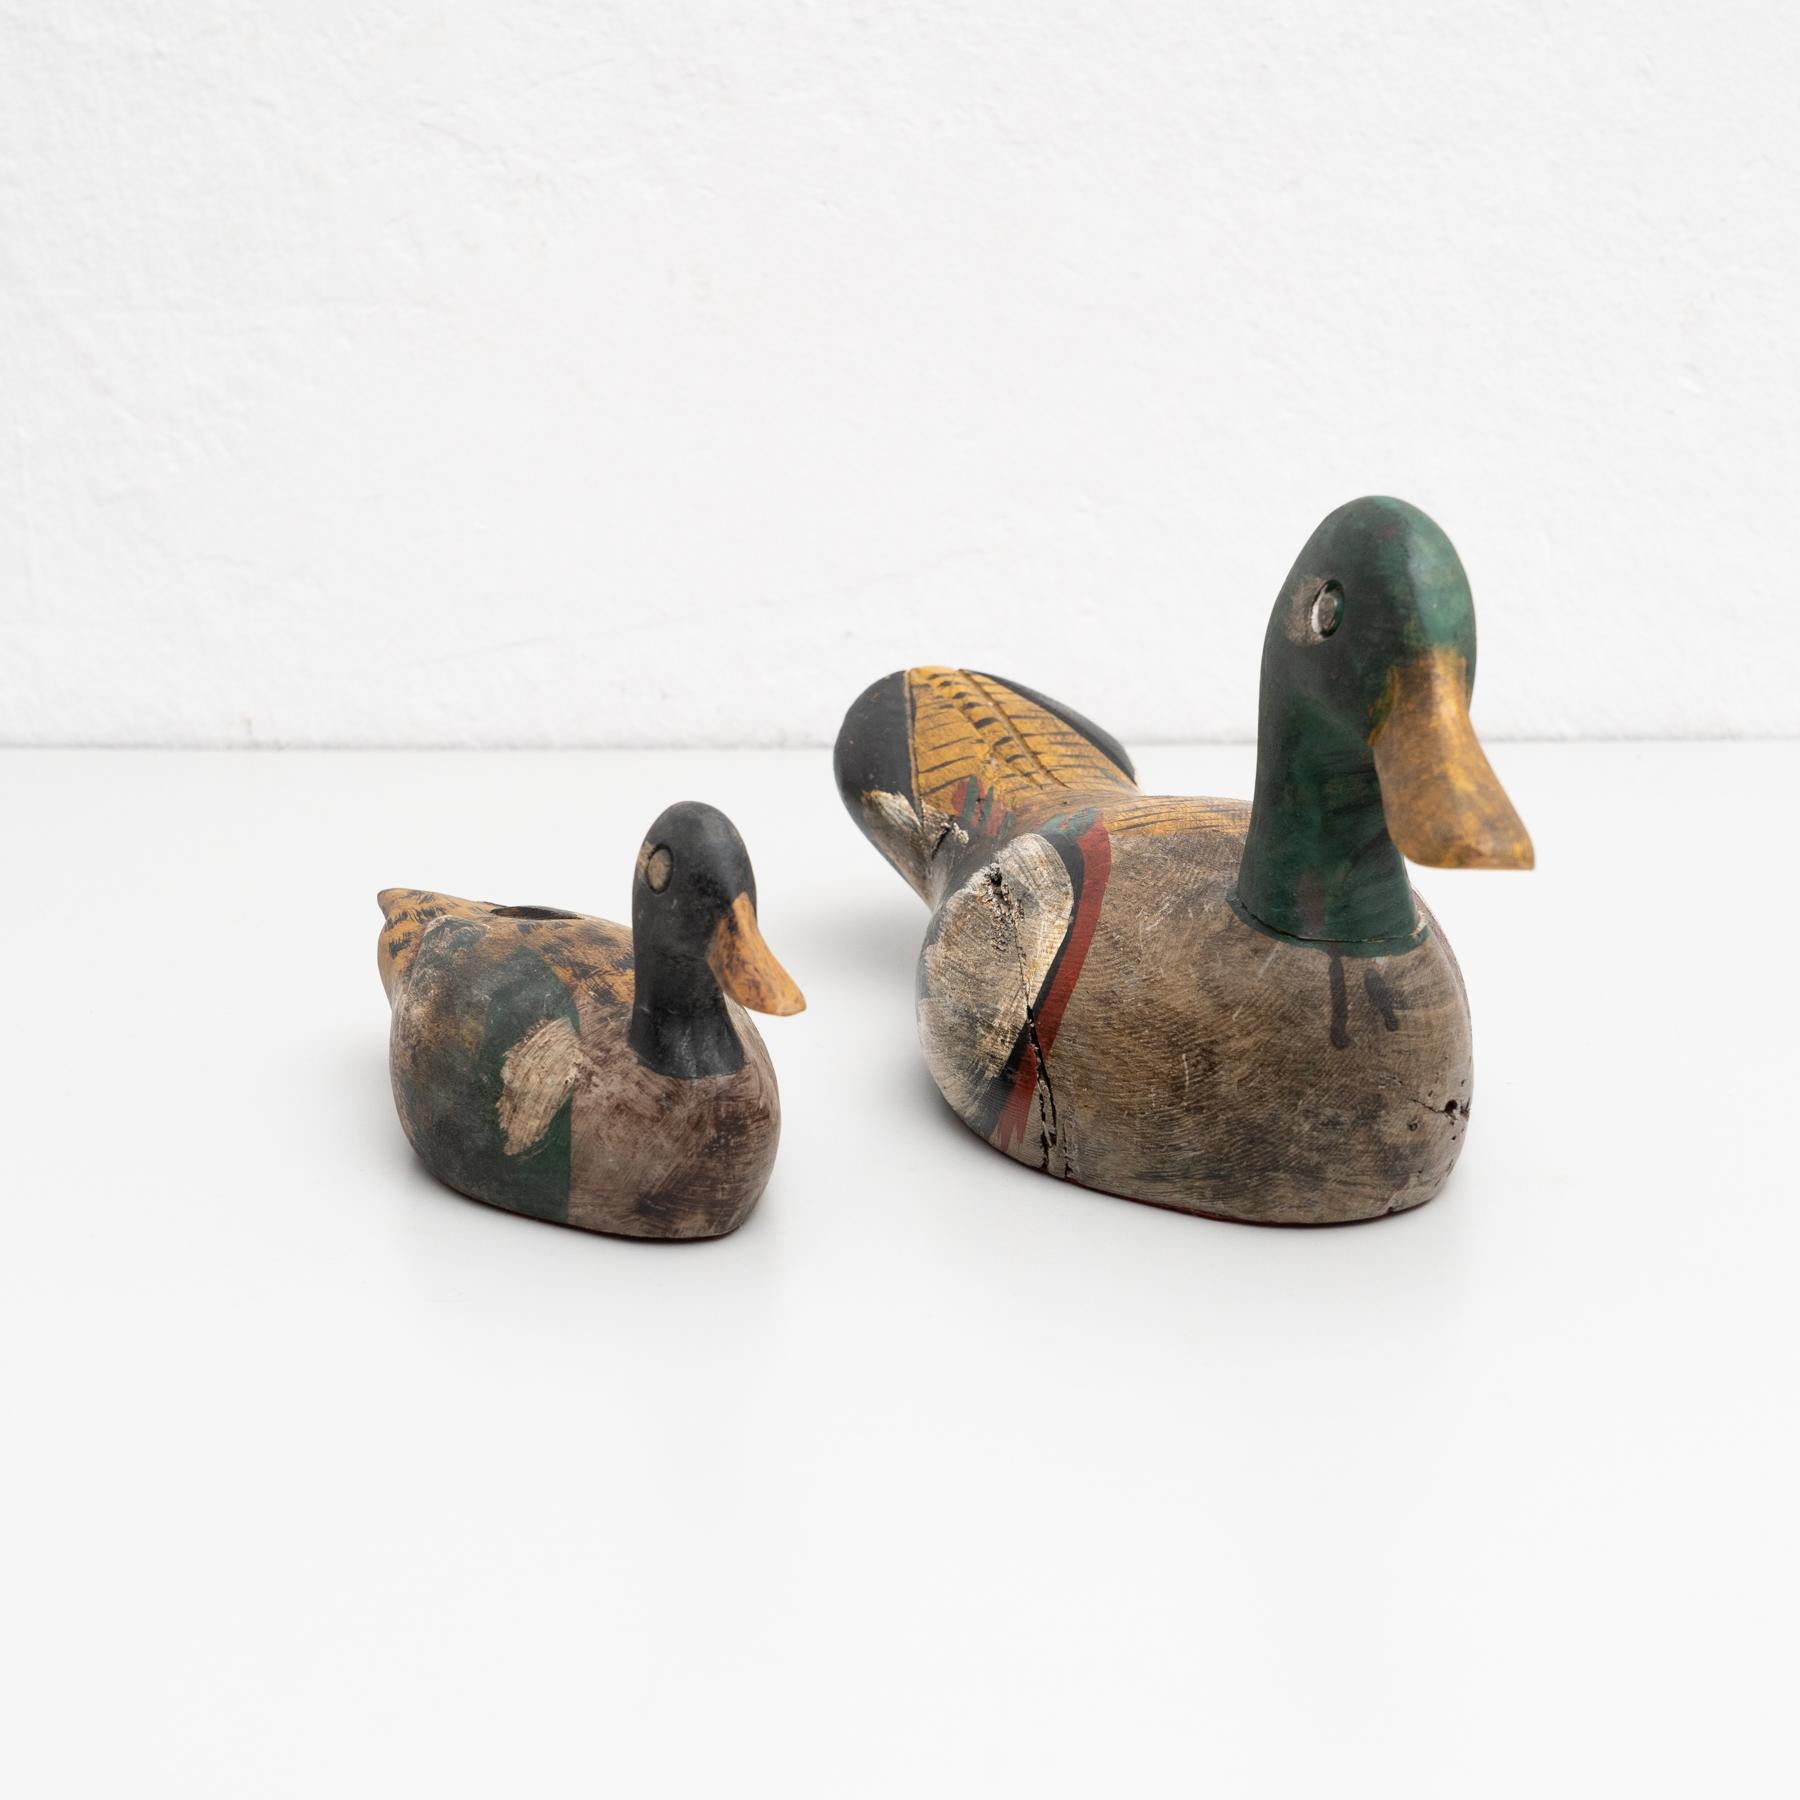 Spanish Set of Two Antique Hand-Painted Wooden Duck Figures circa 1950